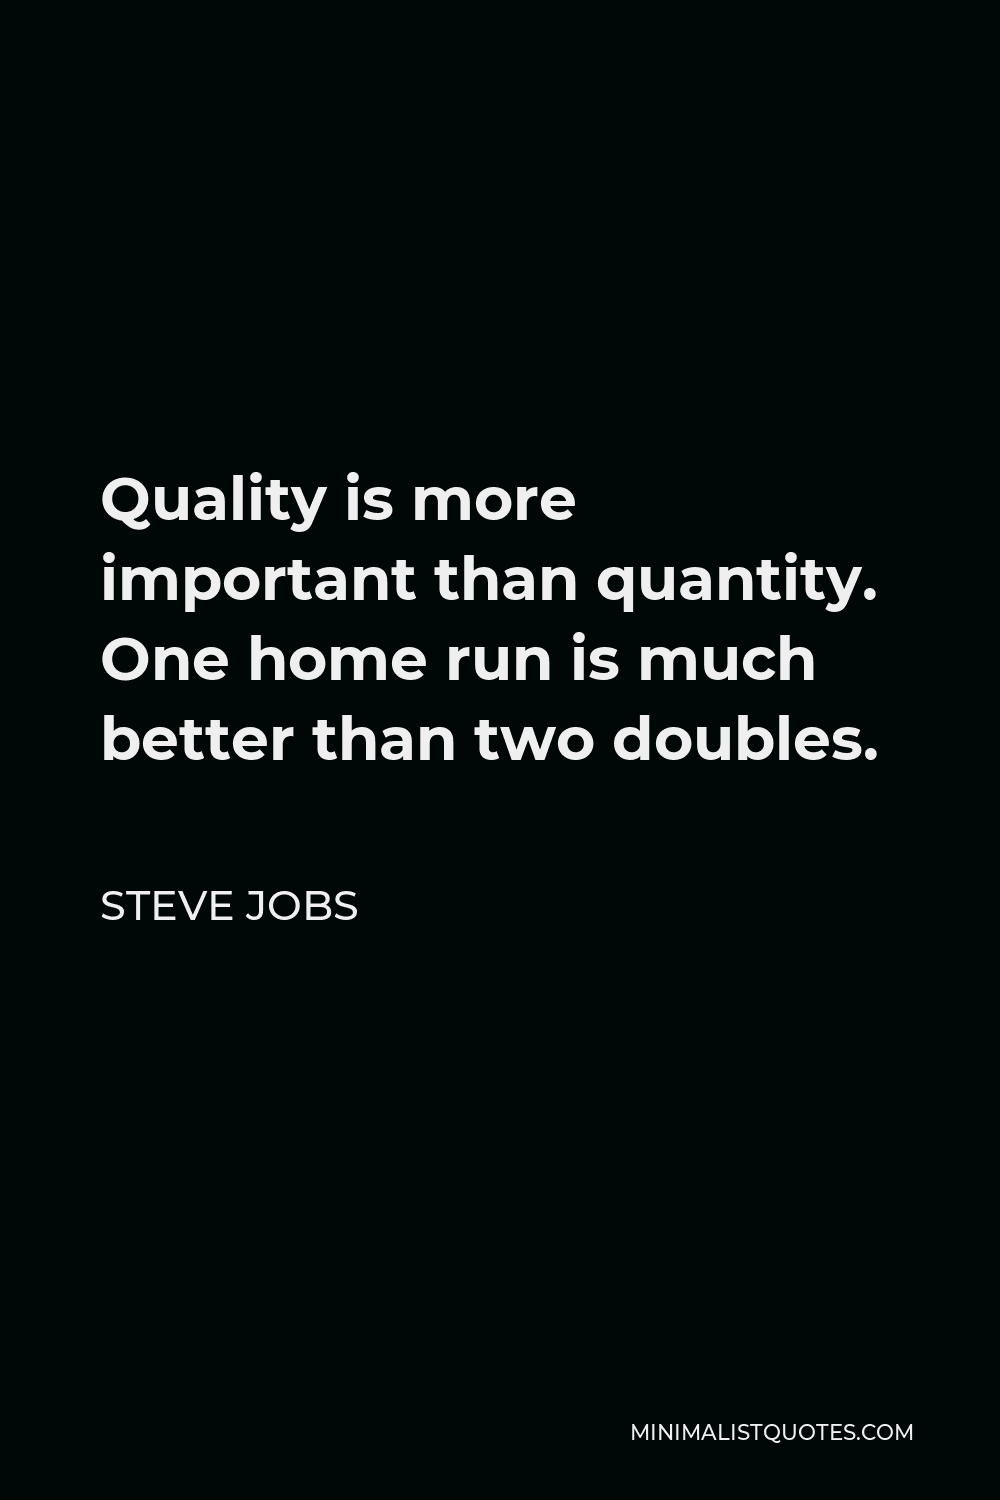 Steve Jobs Quote - Quality is more important than quantity. One home run is much better than two doubles.